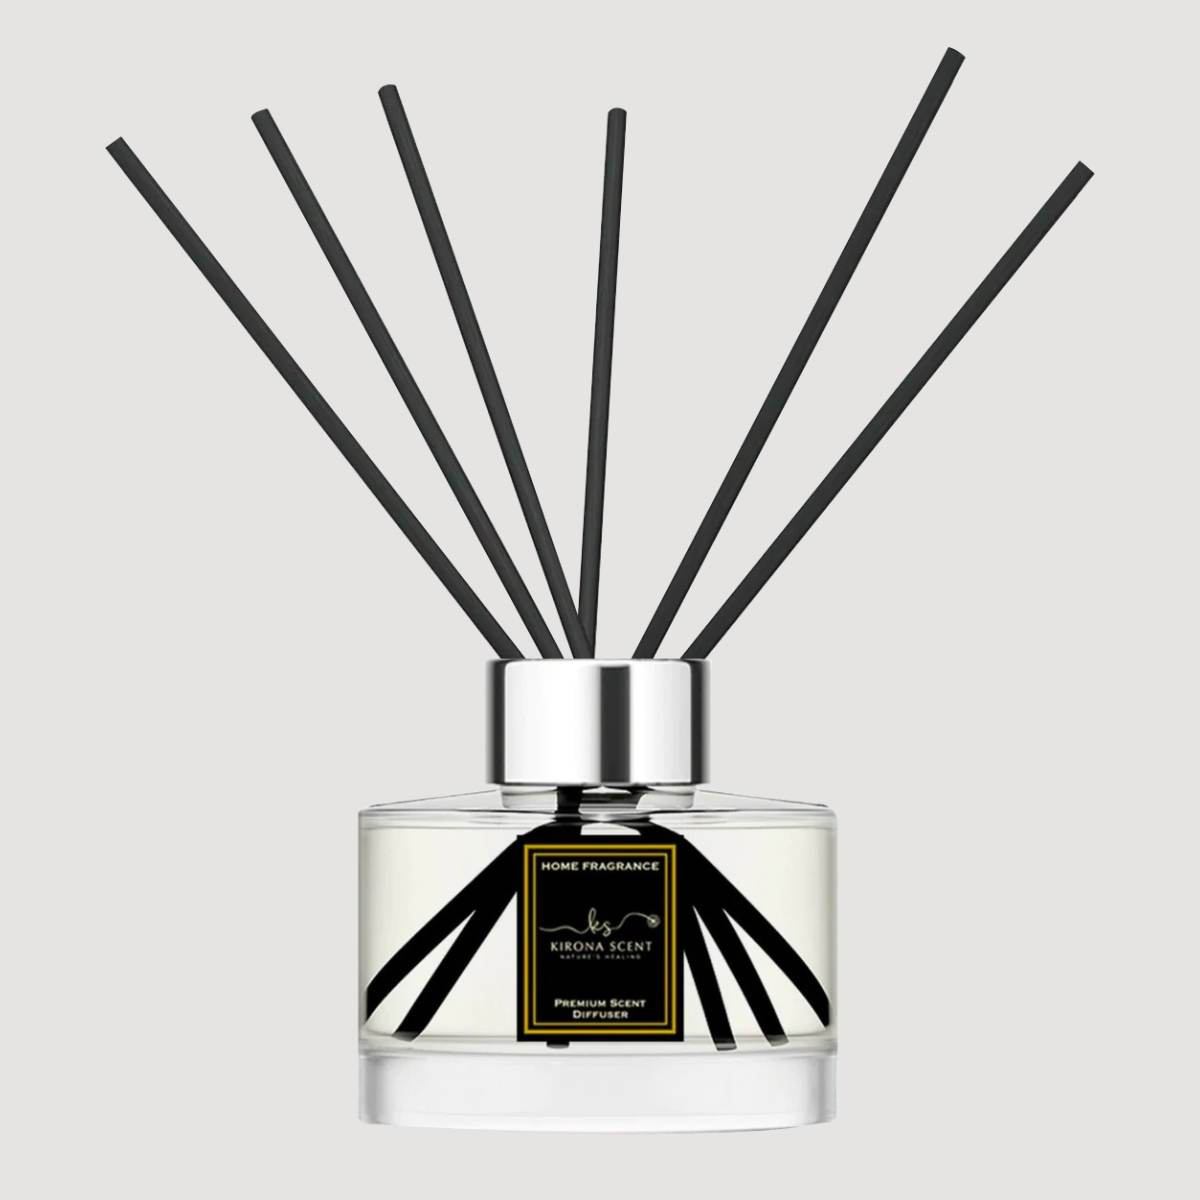 Singapore best-selling reed diffuser. Spa Reed Diffuser